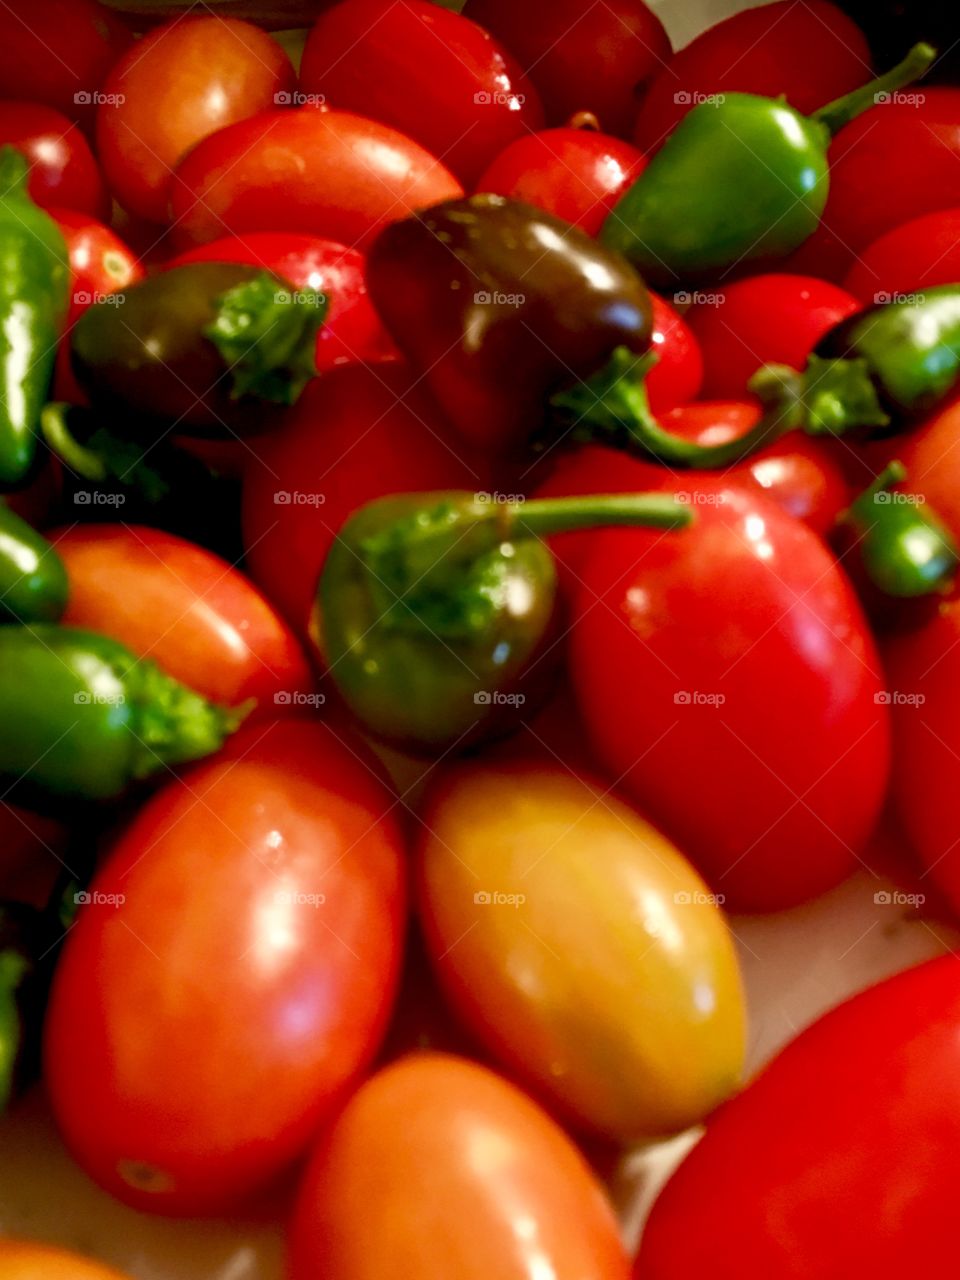 Tomatoes and peppers 